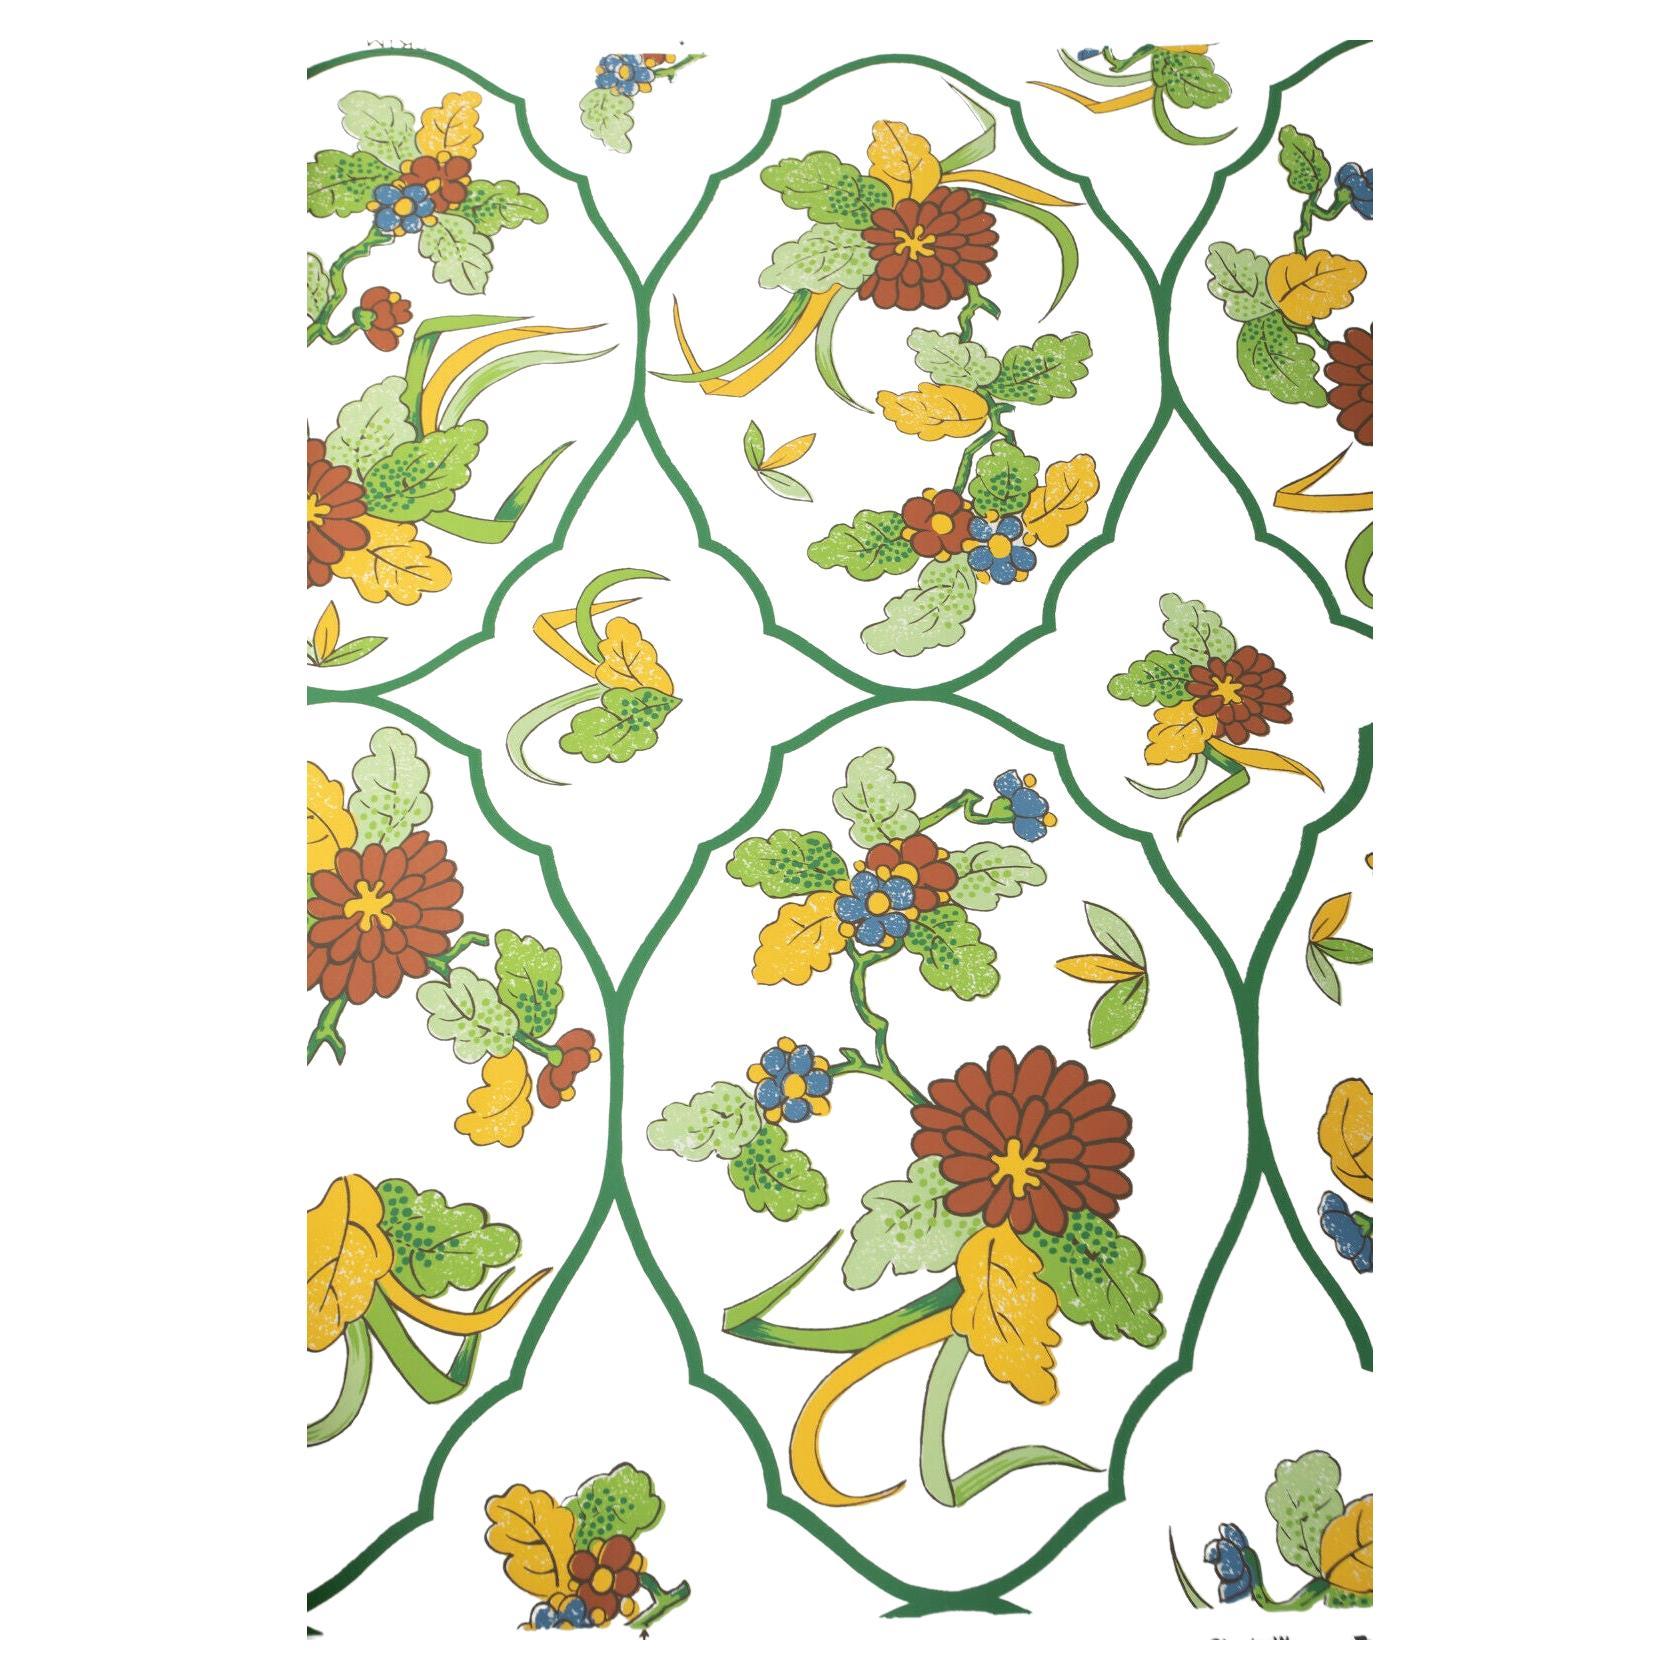 Vintage Sherle Wagner handprinted enamel mums floral pattern.
Wallpaper, 1960s. Gorgeous, rare hand-print from Sherle Wagner in their iconic Mums pattern. No longer in production. Amazing quality, heavy, high-quality paper. Measures approx. 30